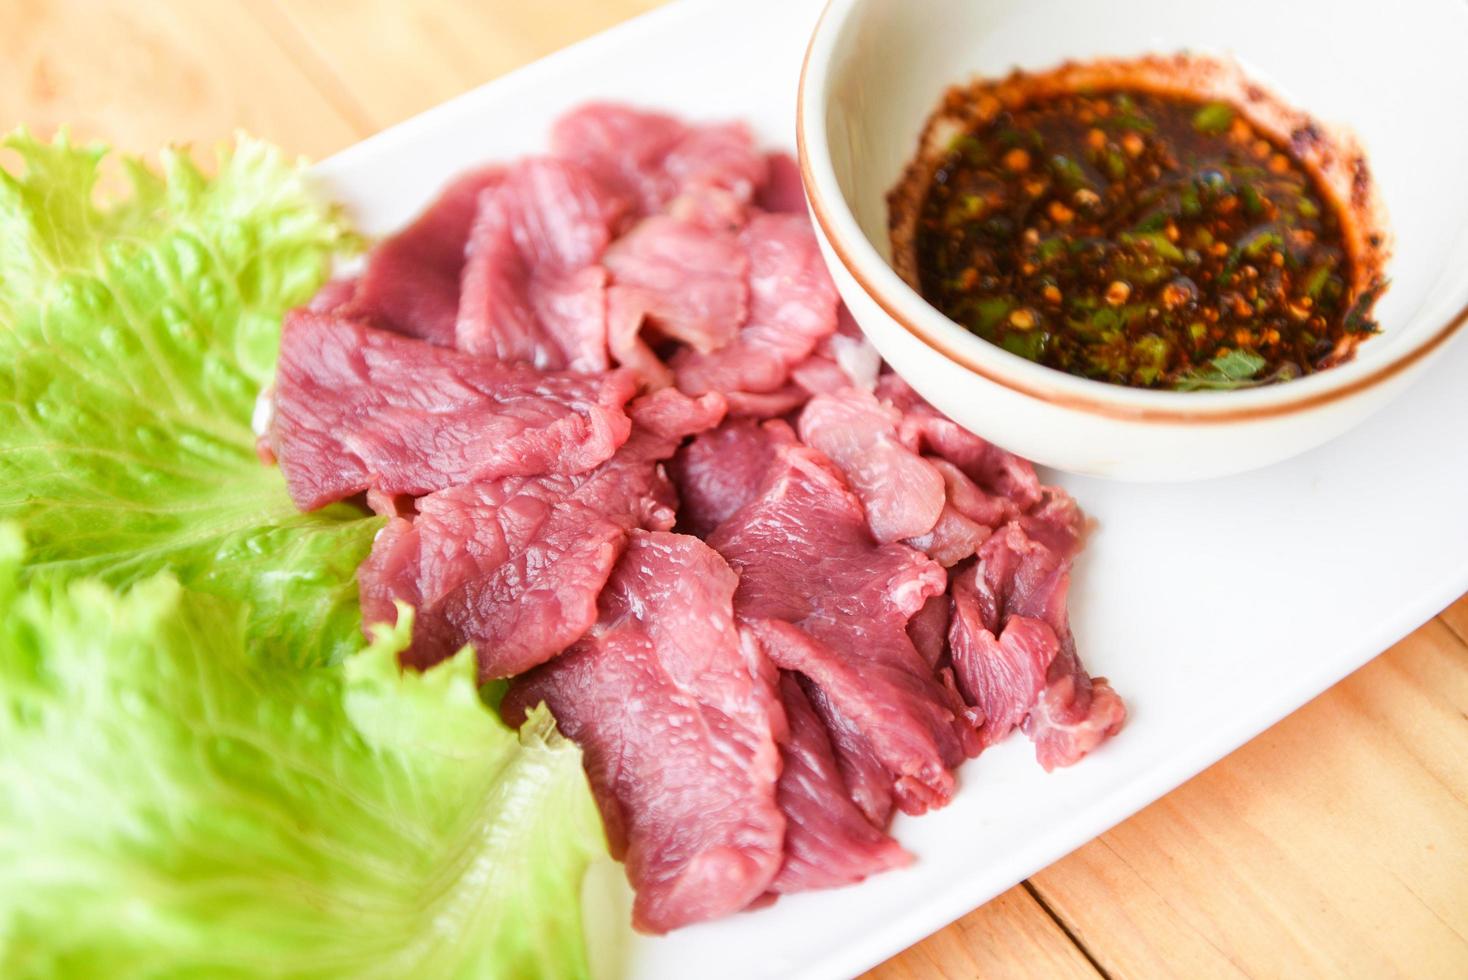 beef meat salad, fresh raw beef slice on plate with spicy sauce and vegetables lettuce - thai food photo